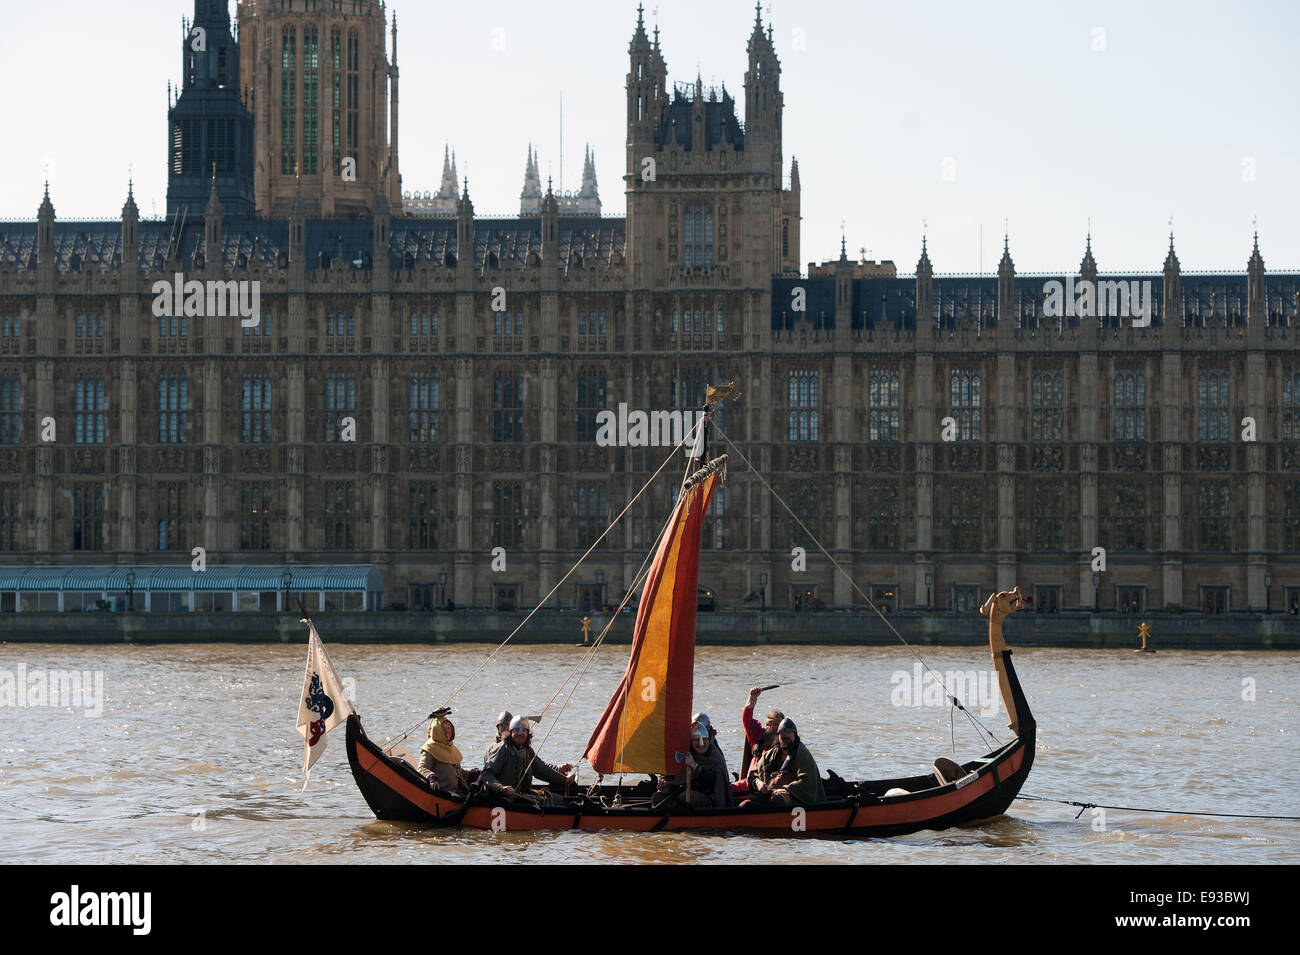 A crew of Vikings arrive in a replica Viking boat on the River Thames